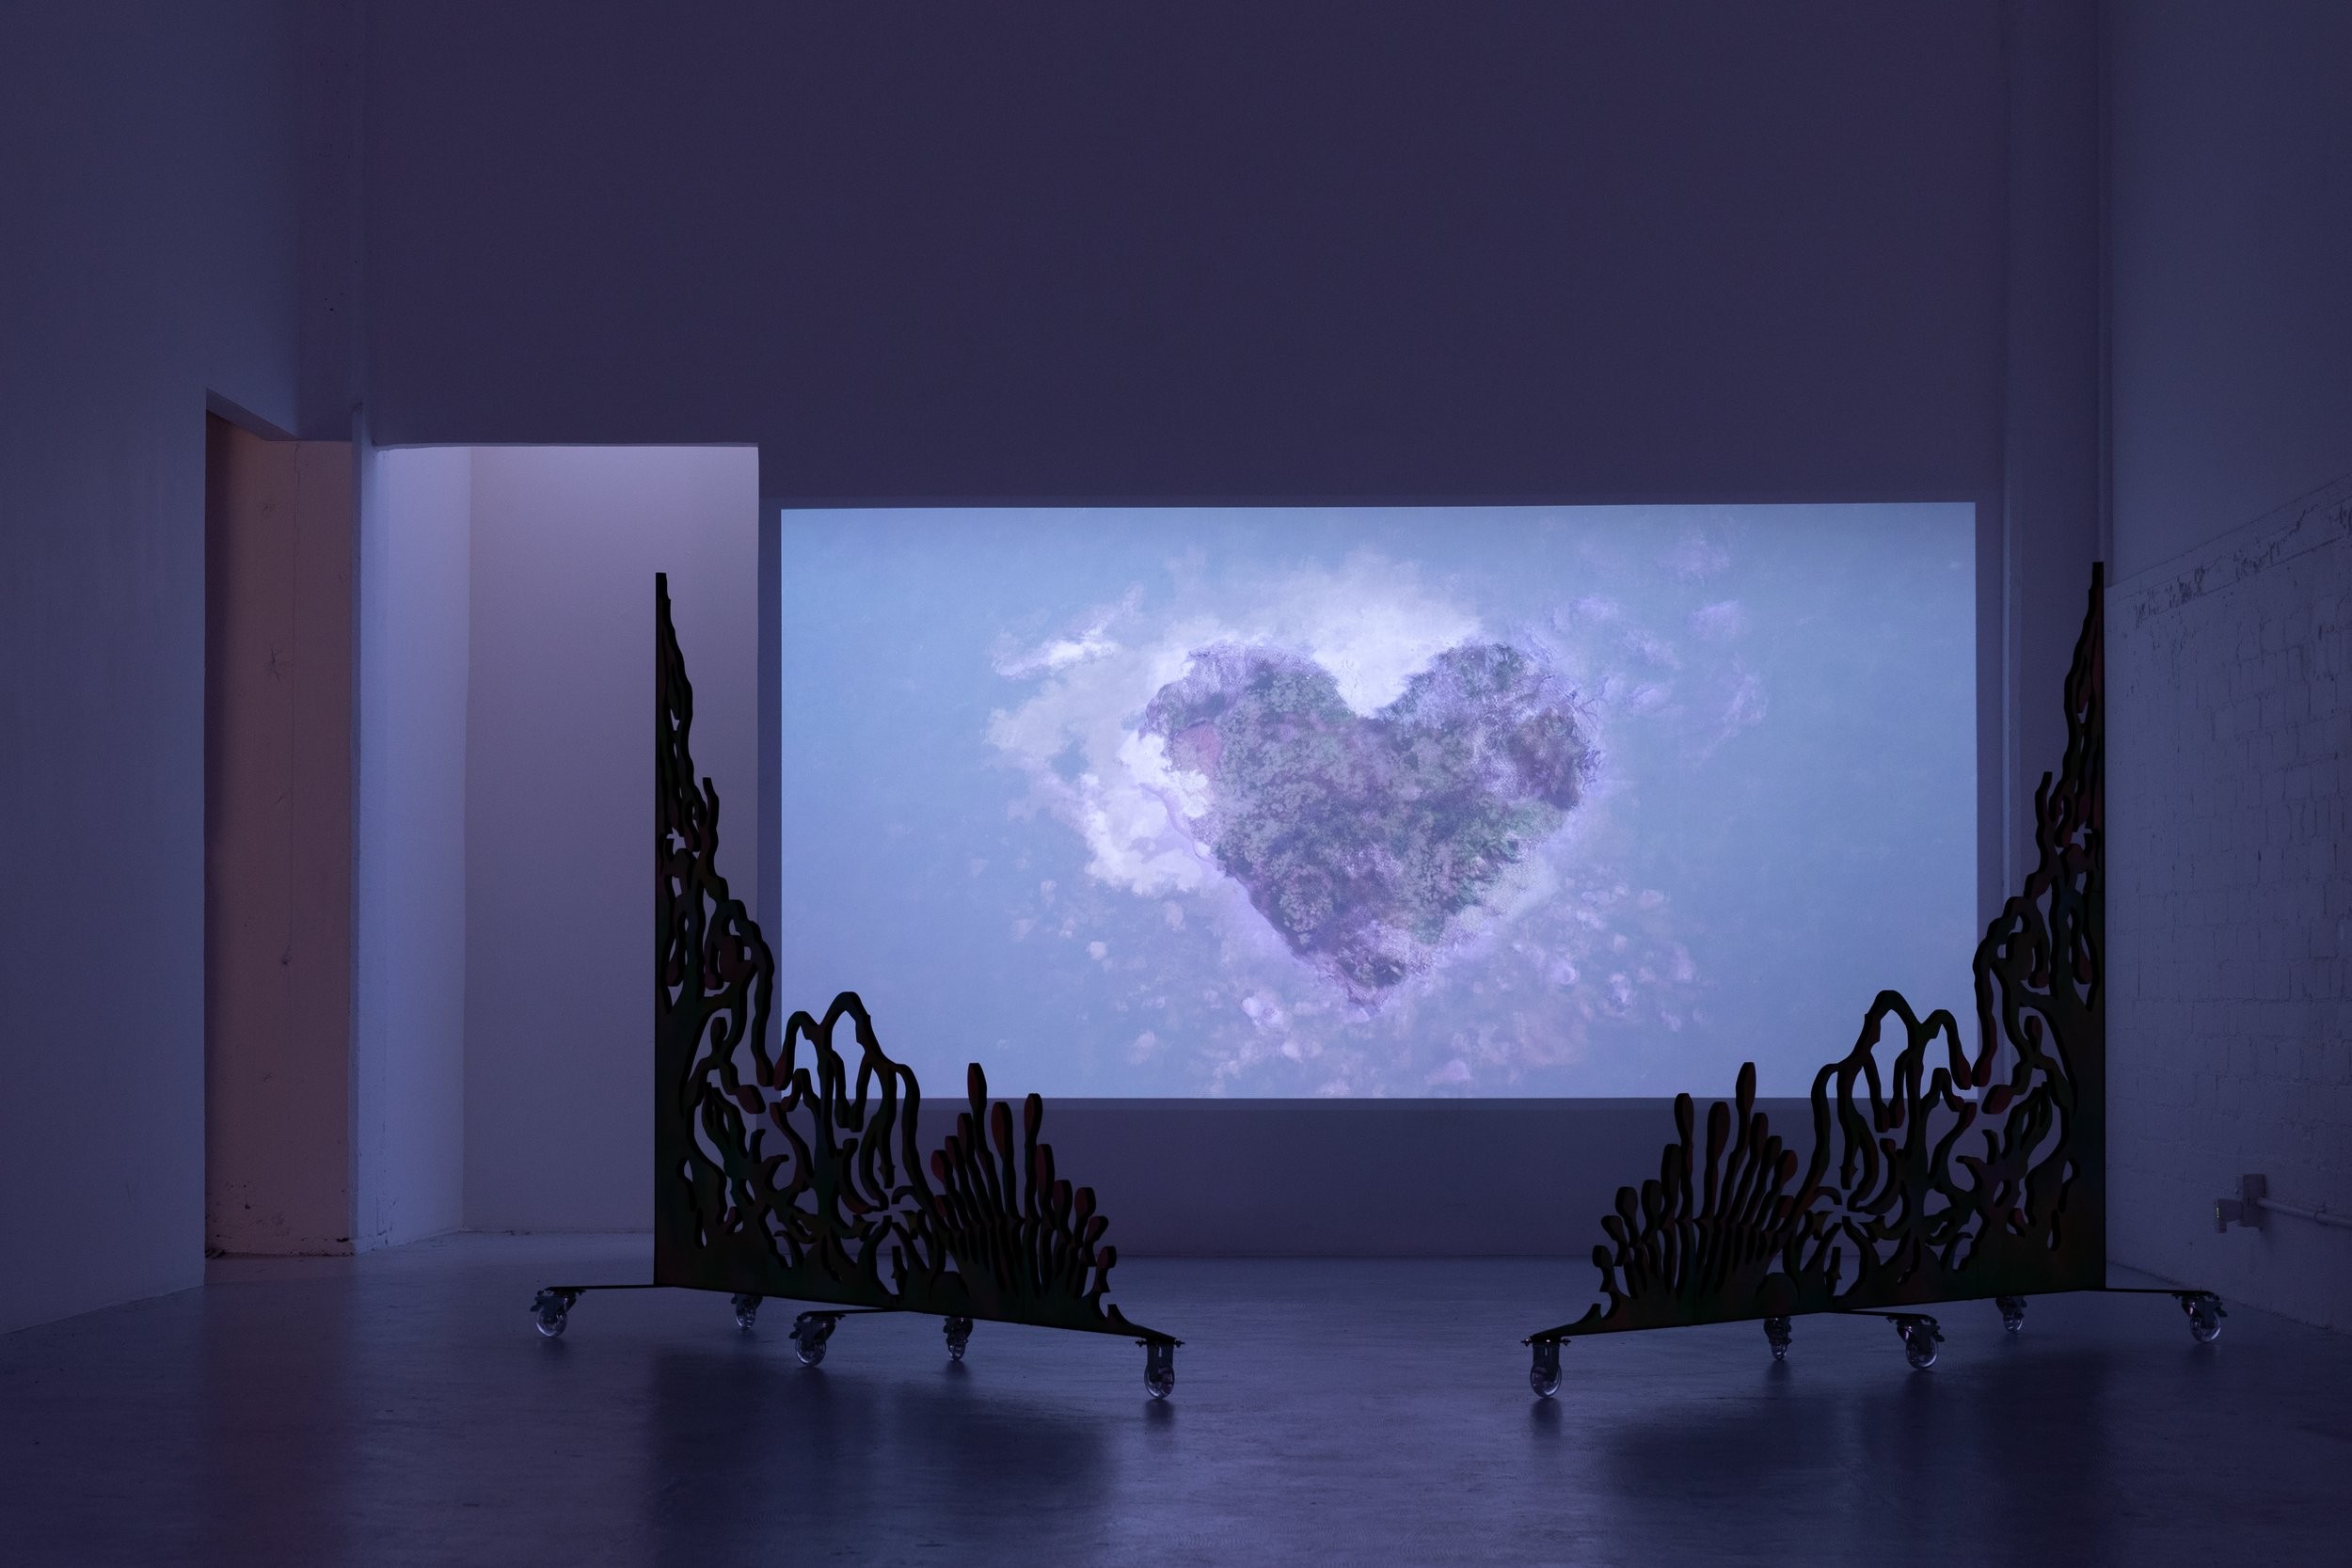 A projection of a dreamy purple heart surrounded by clouds, bordered in the space by two intricate gates on wheels